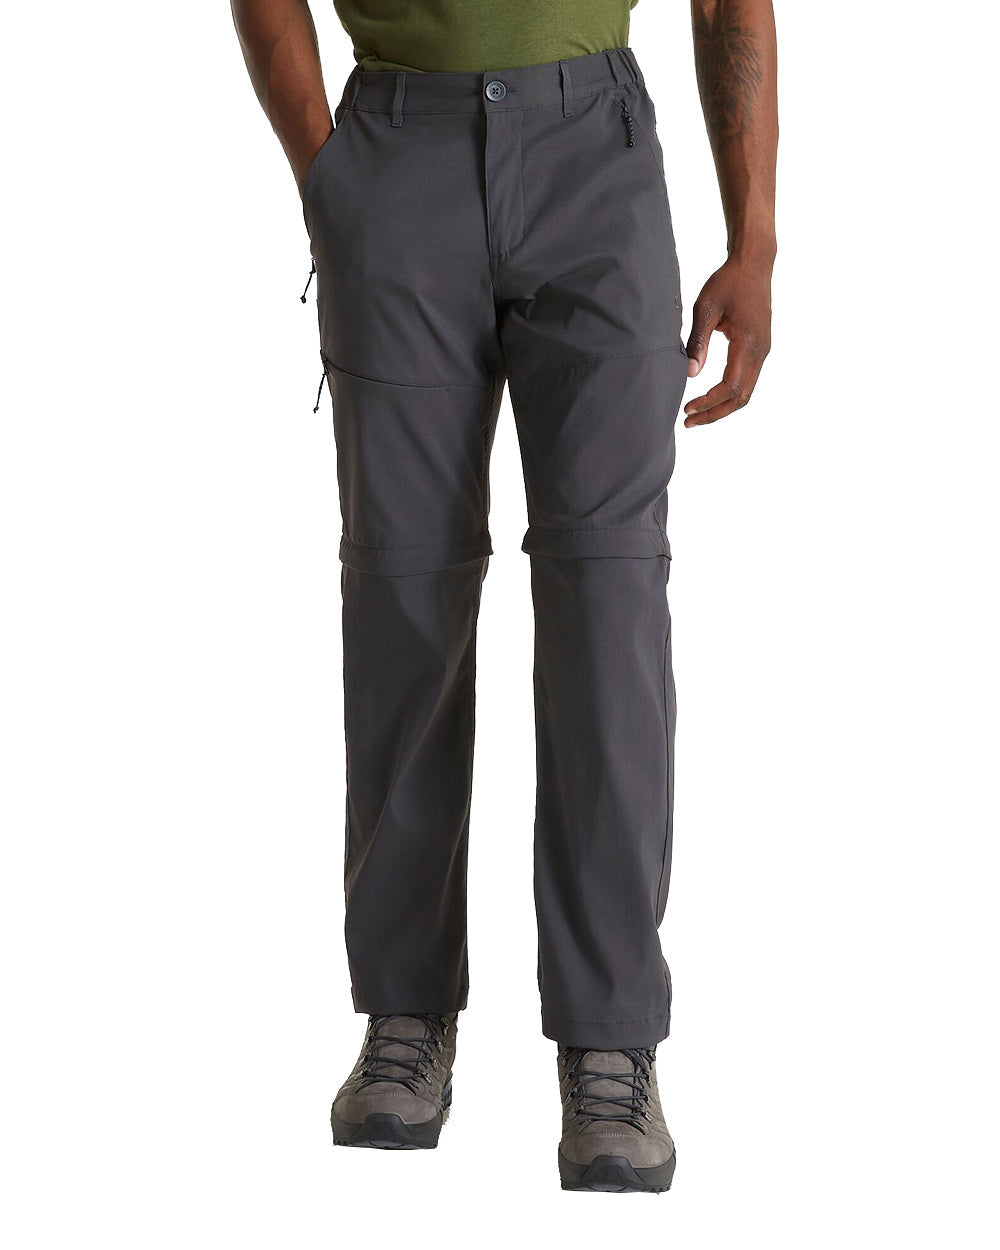 Dark Lead Coloured Craghoppers Mens Kiwi Pro II Convertible Trousers On A White Background 